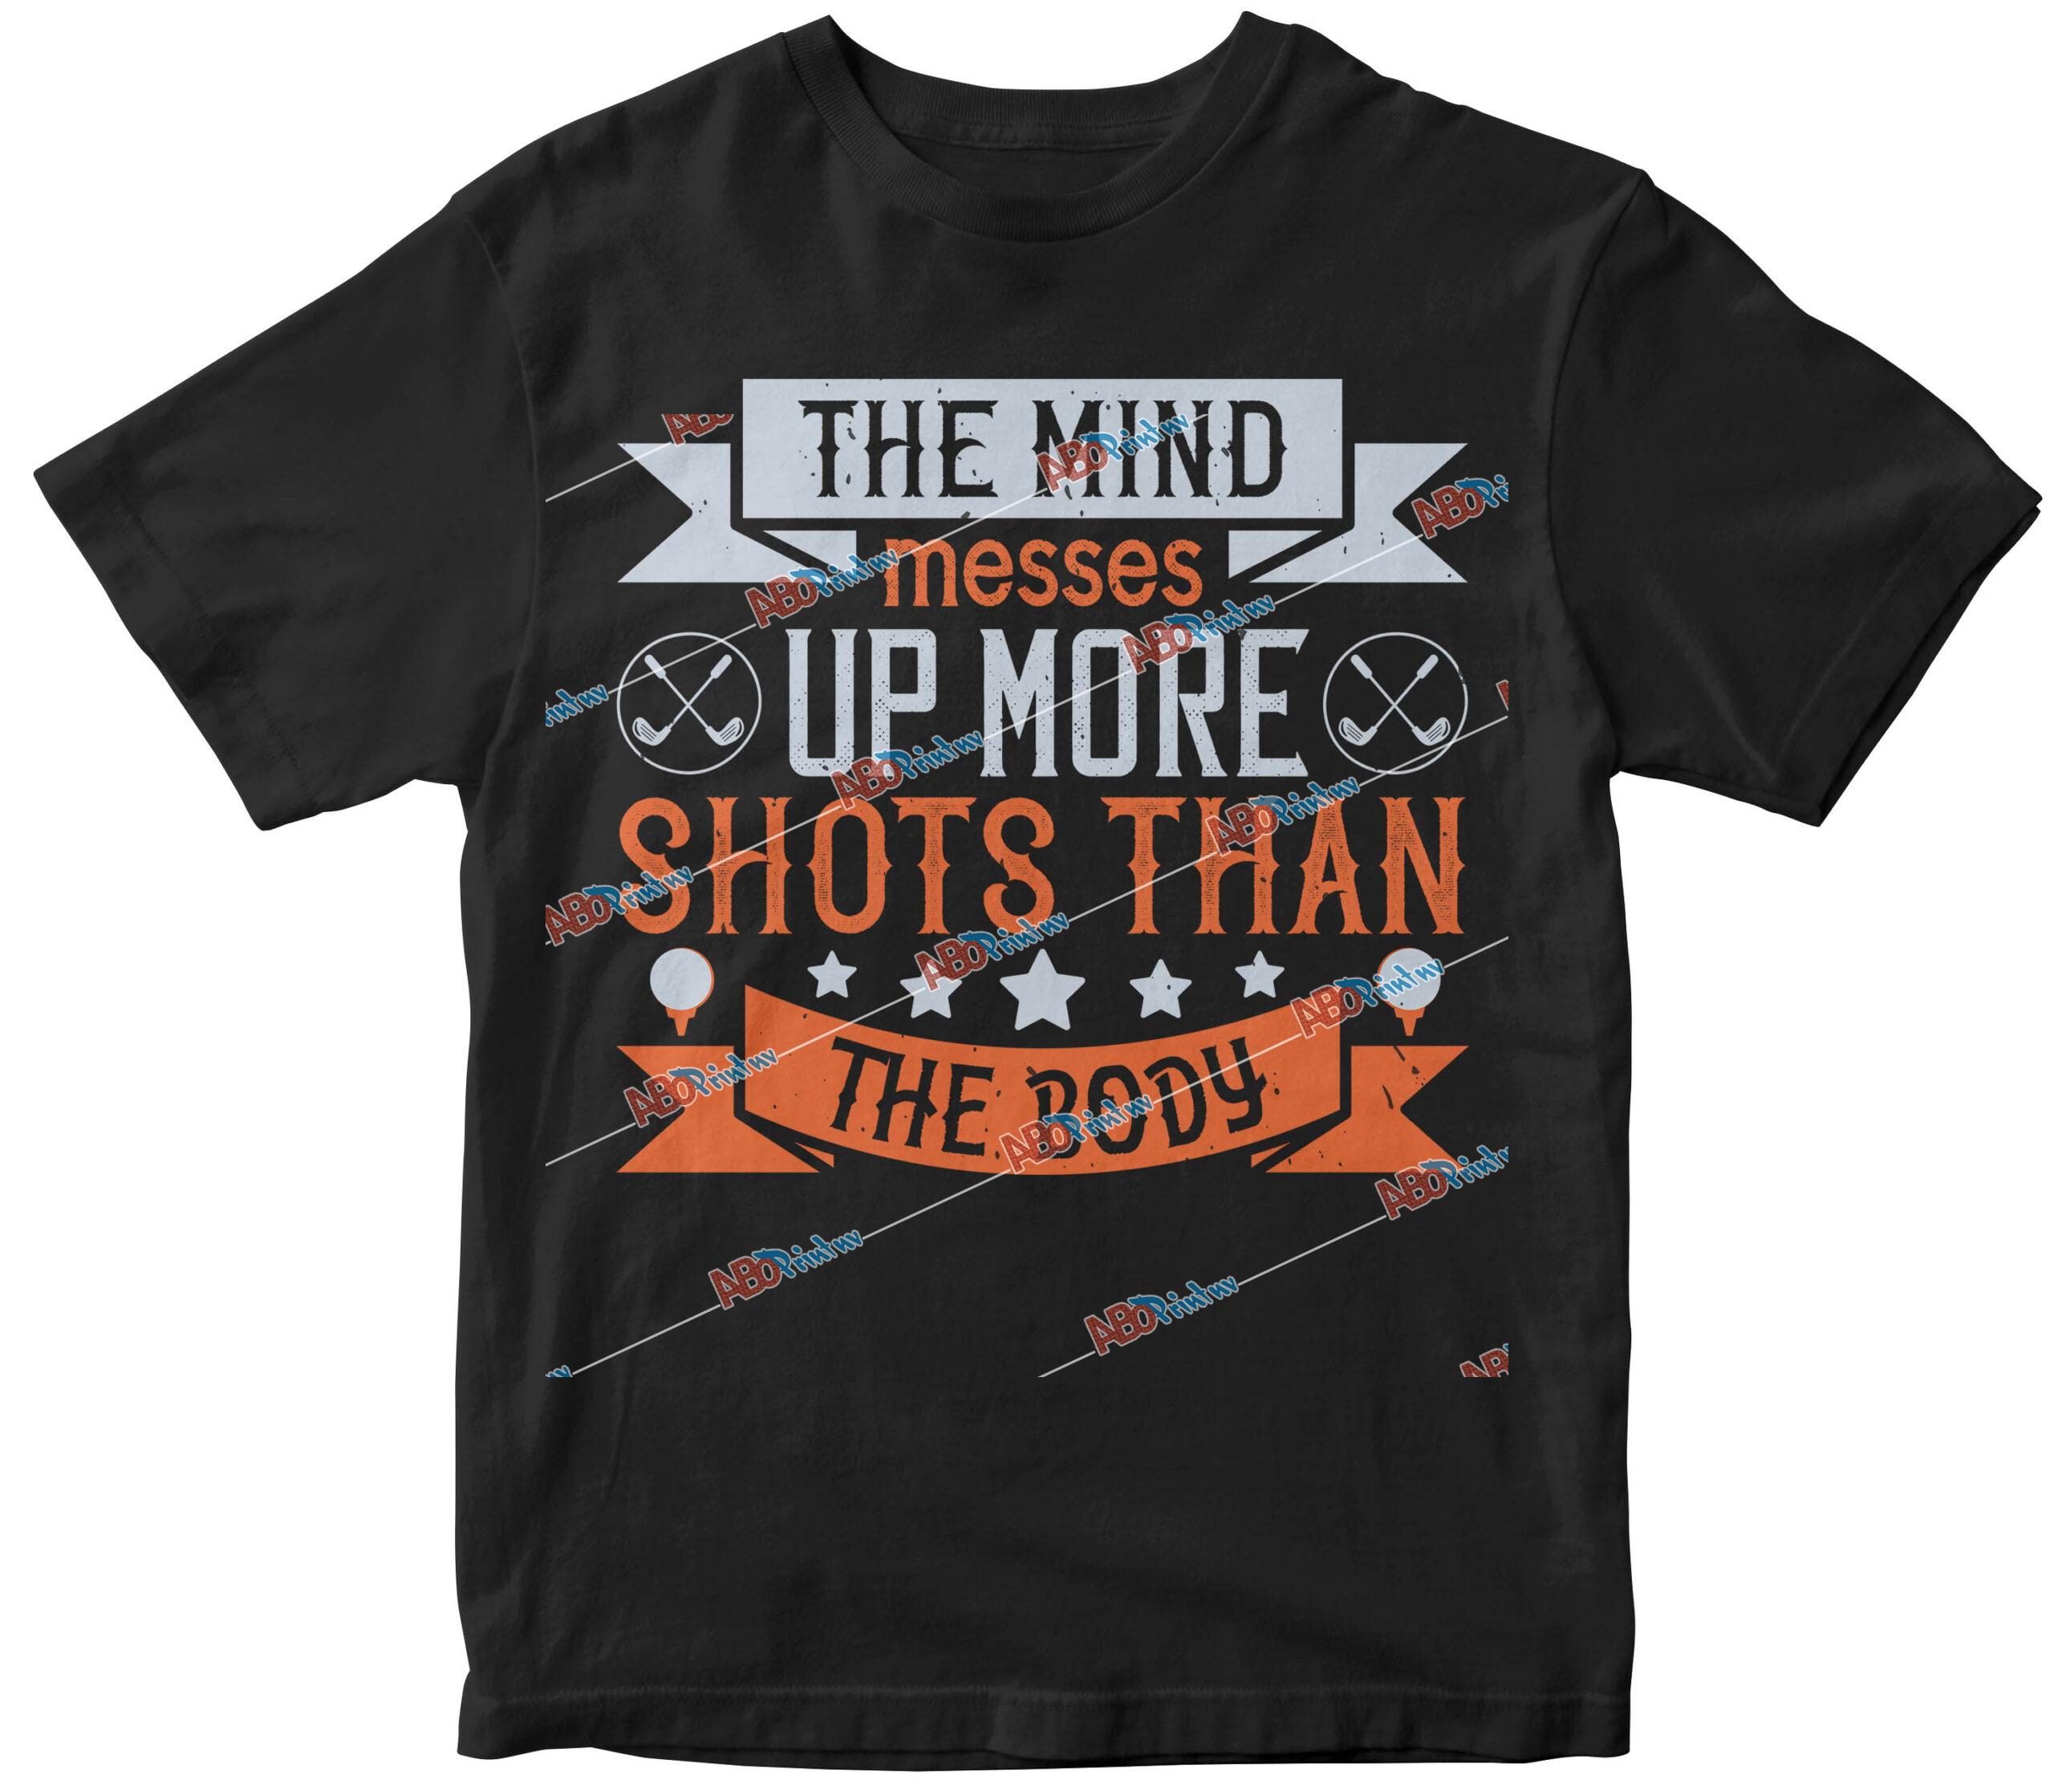 The mind messes up more shots than the body.jpg